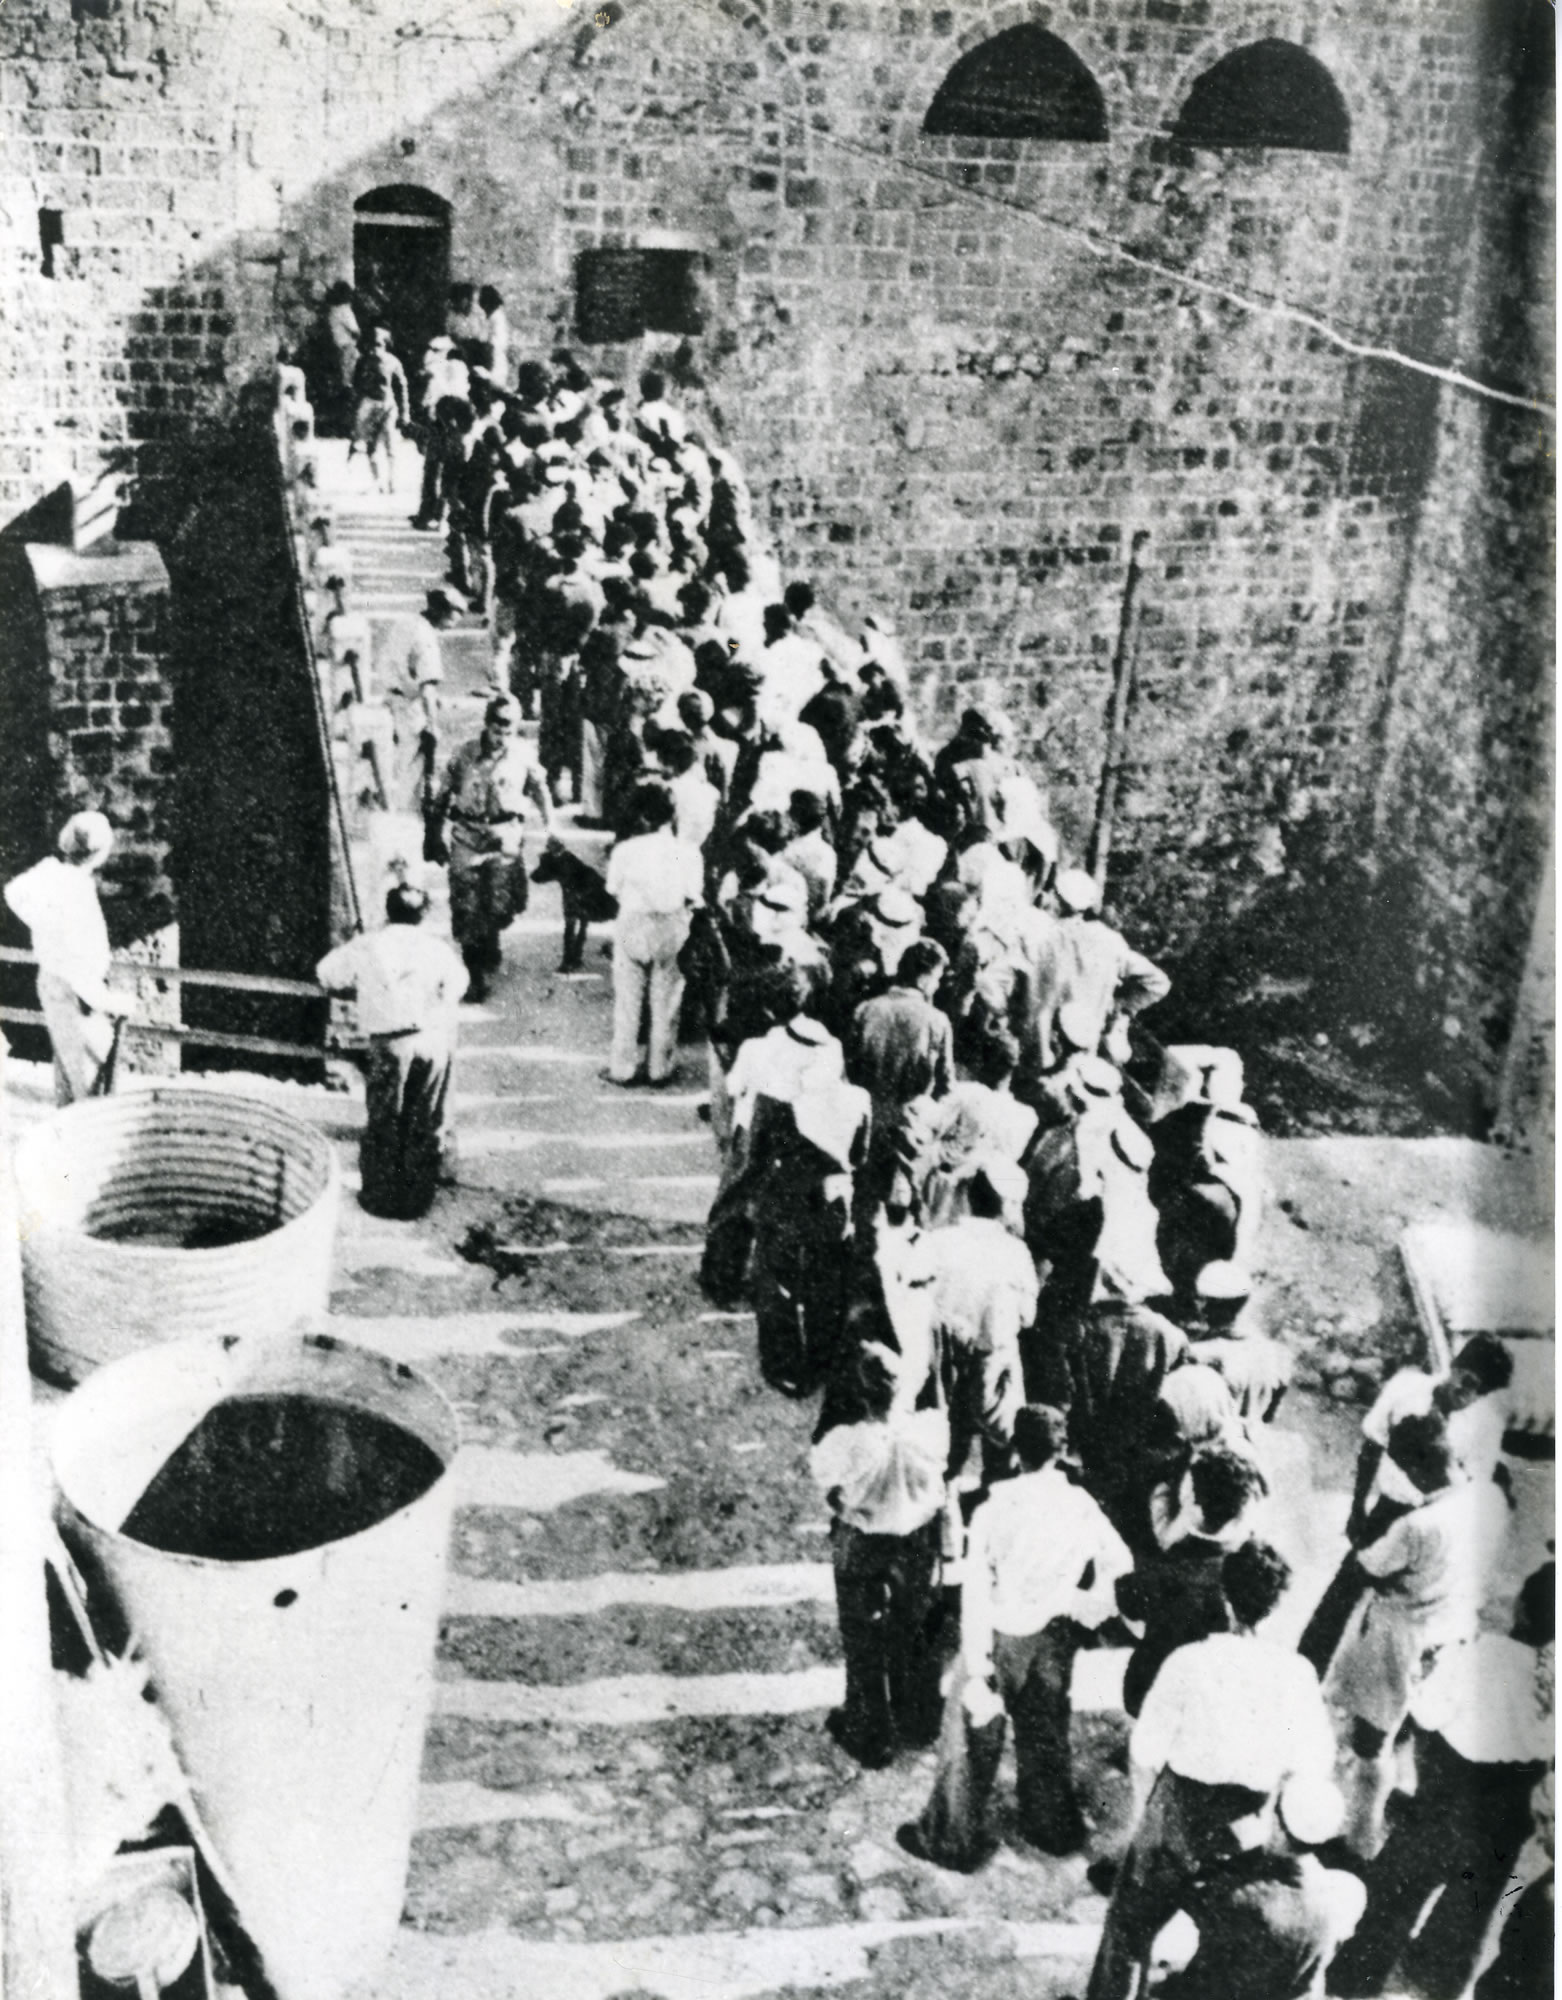 Acre's Fall Source: Institute for Palestine Studies, Photograph Collection